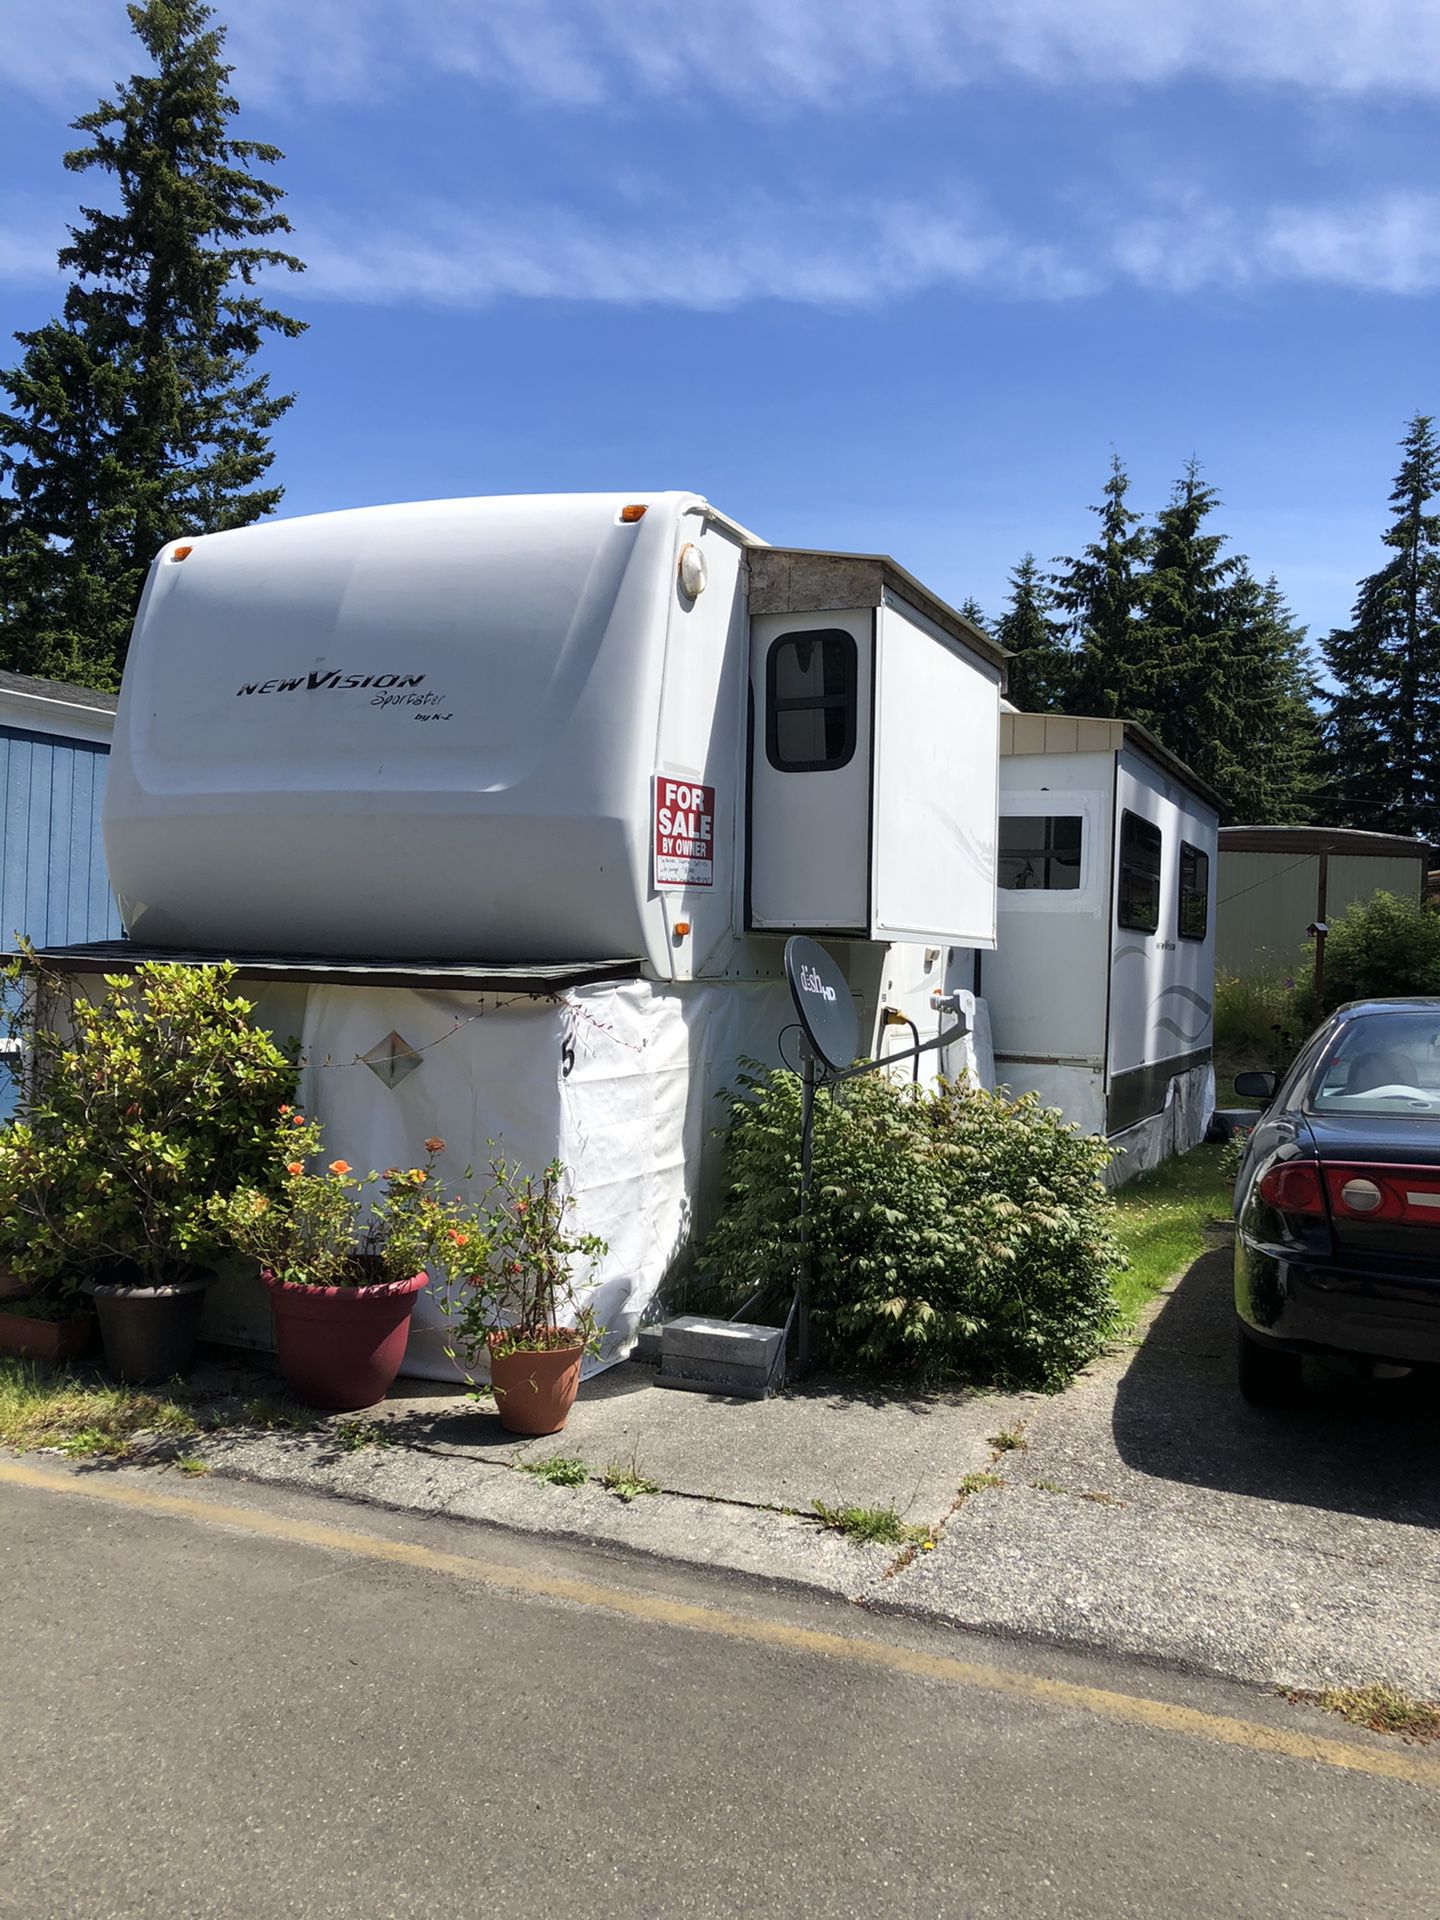 Move in ready Home or toy hauler motivated seller